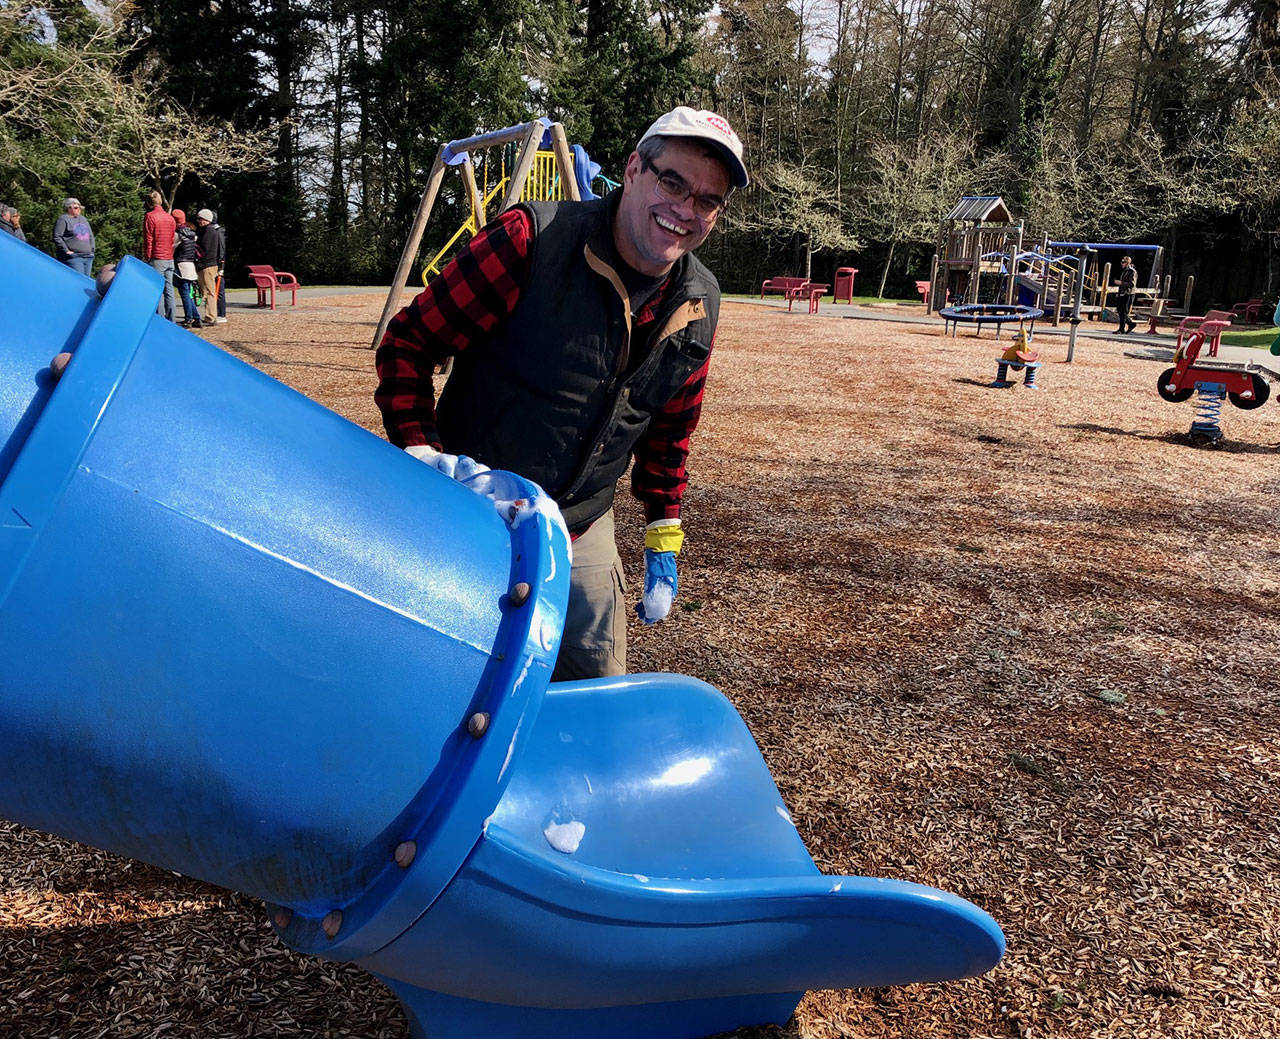 Gene Kuhns at Ober Park doing his part to stop germs and keep the community connected (Kate Dowling Photo).